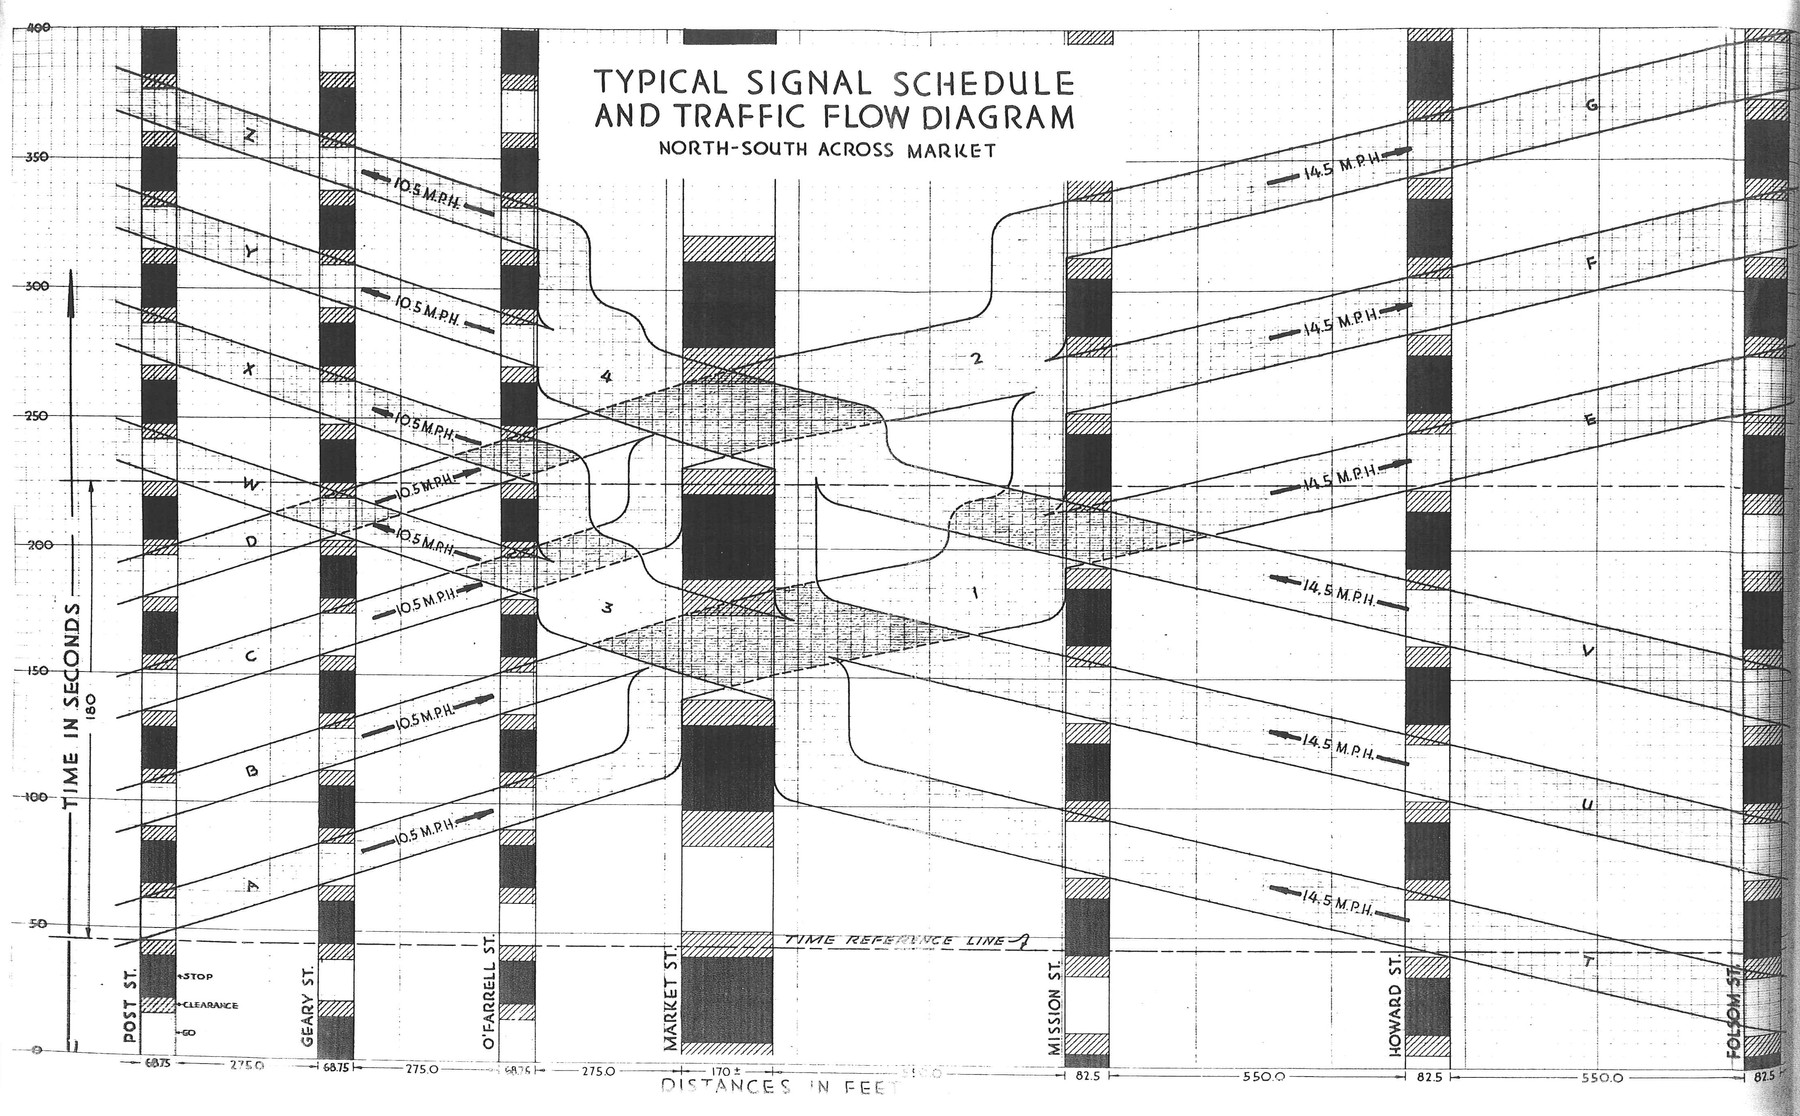 Typical Signal Schedule and Traffic Flow Diagram, North-South across Market (1929)